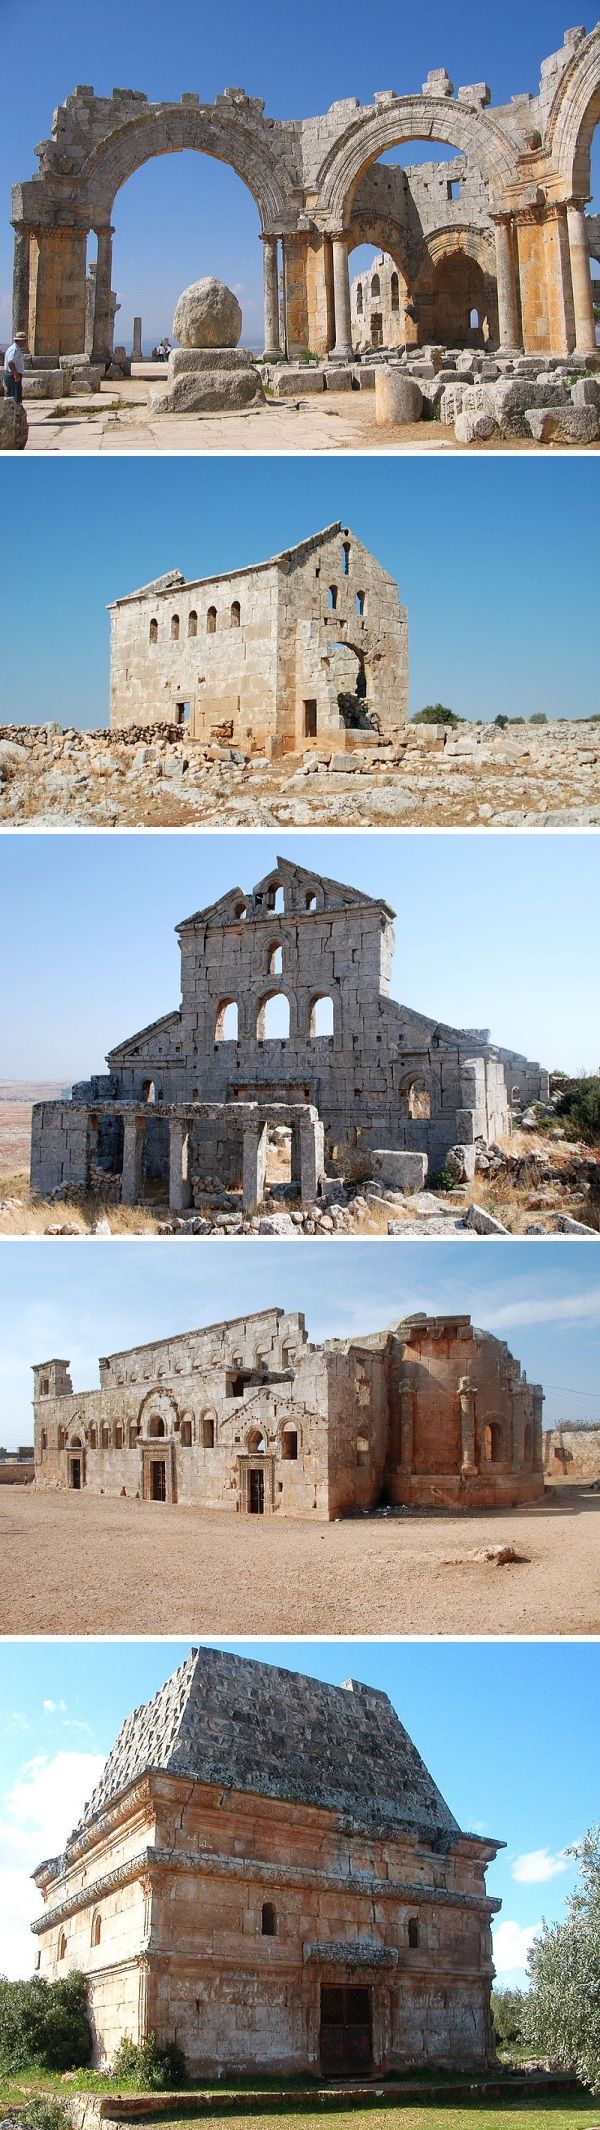 The Magnificent “Dead Cities” of Ancient Syria